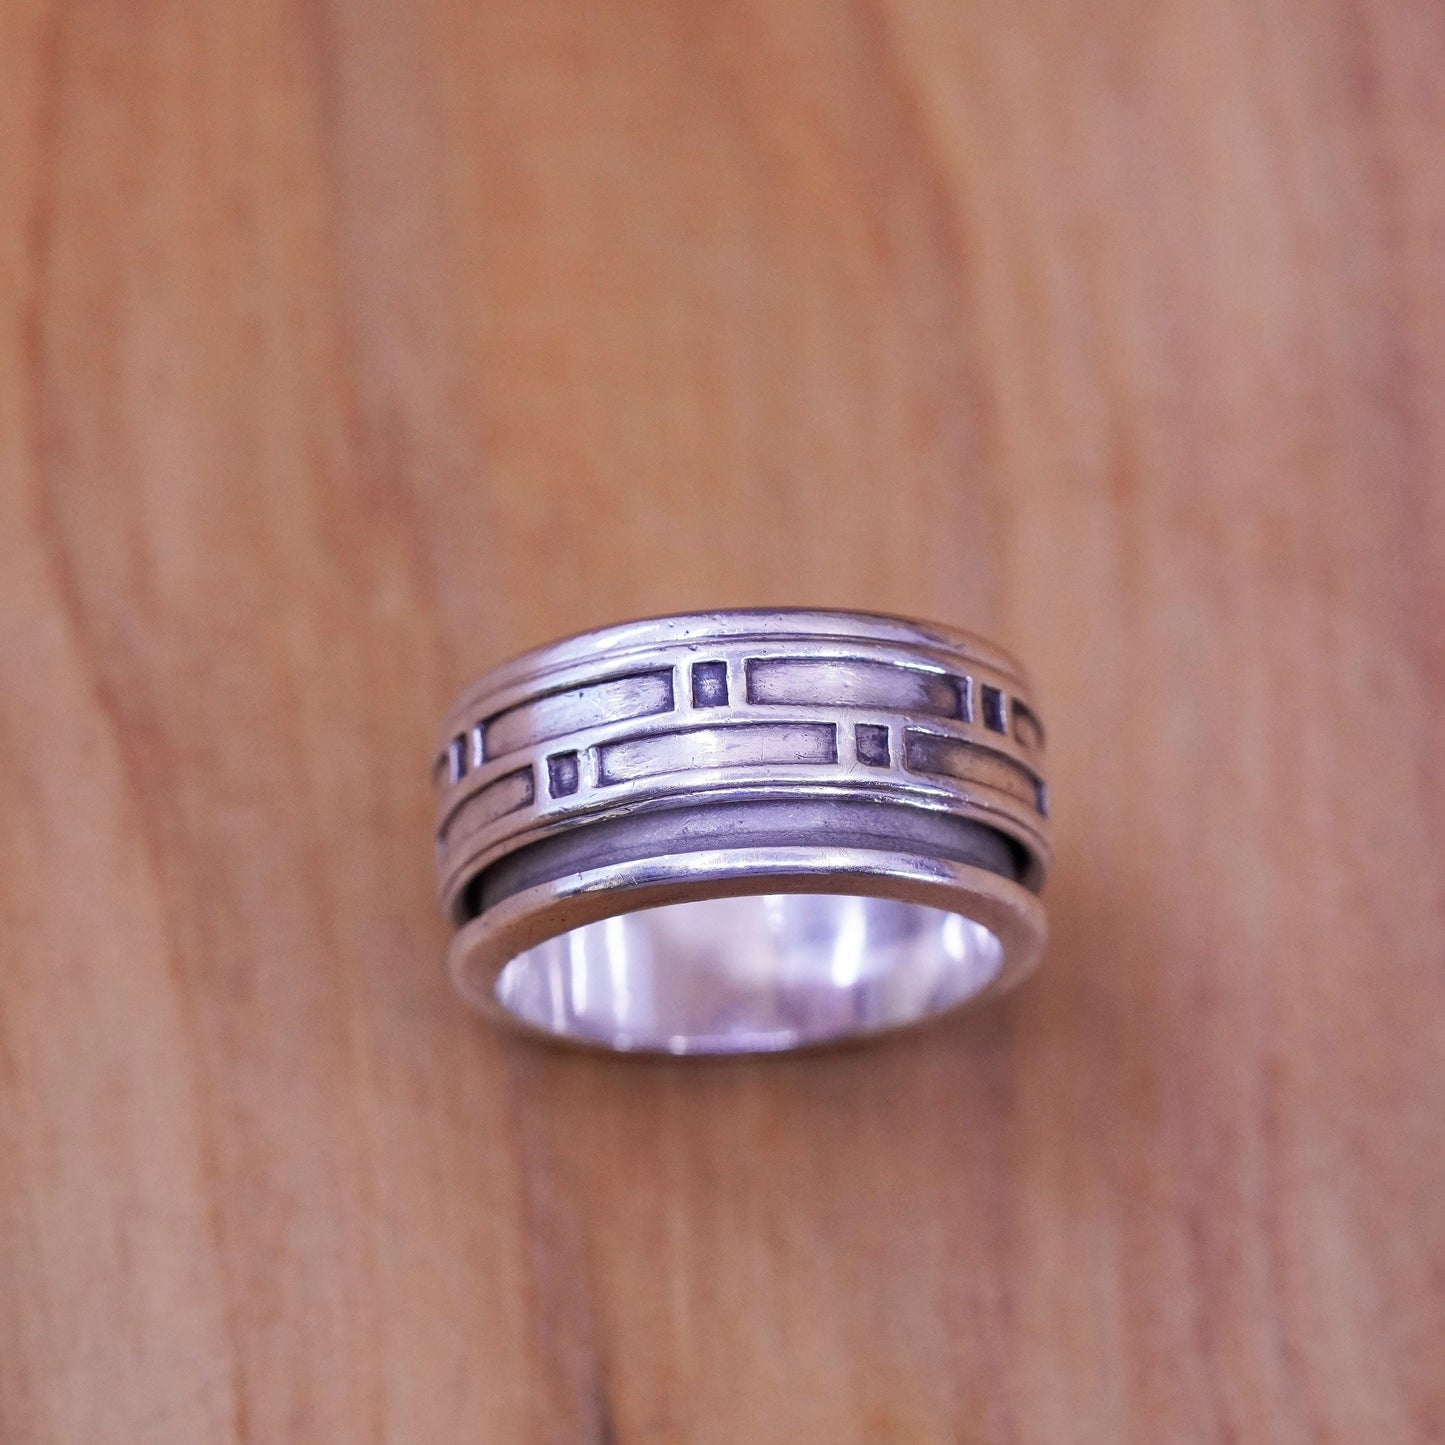 Size 6.25, vintage Sterling silver prayer ring, 925 textured spinner band